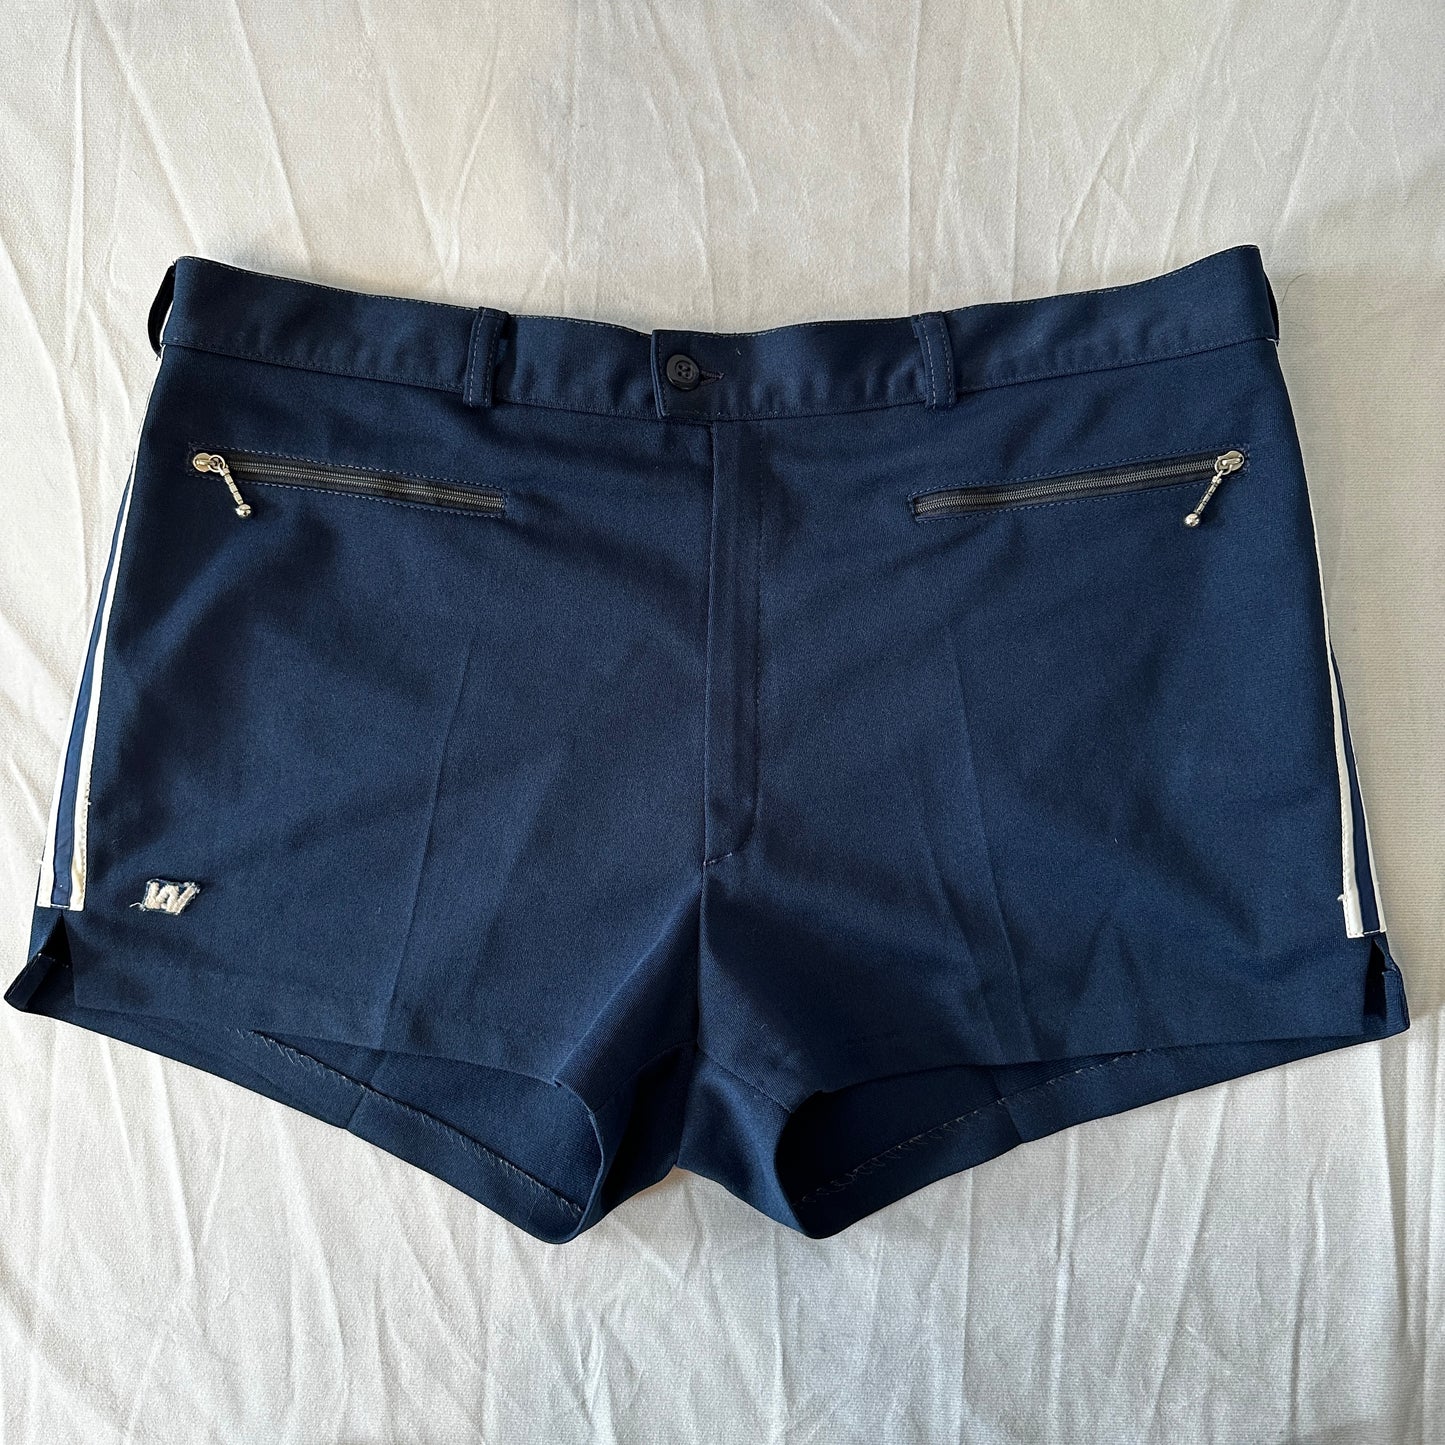 Vintage 80s Tennis Shorts - L - Made in France